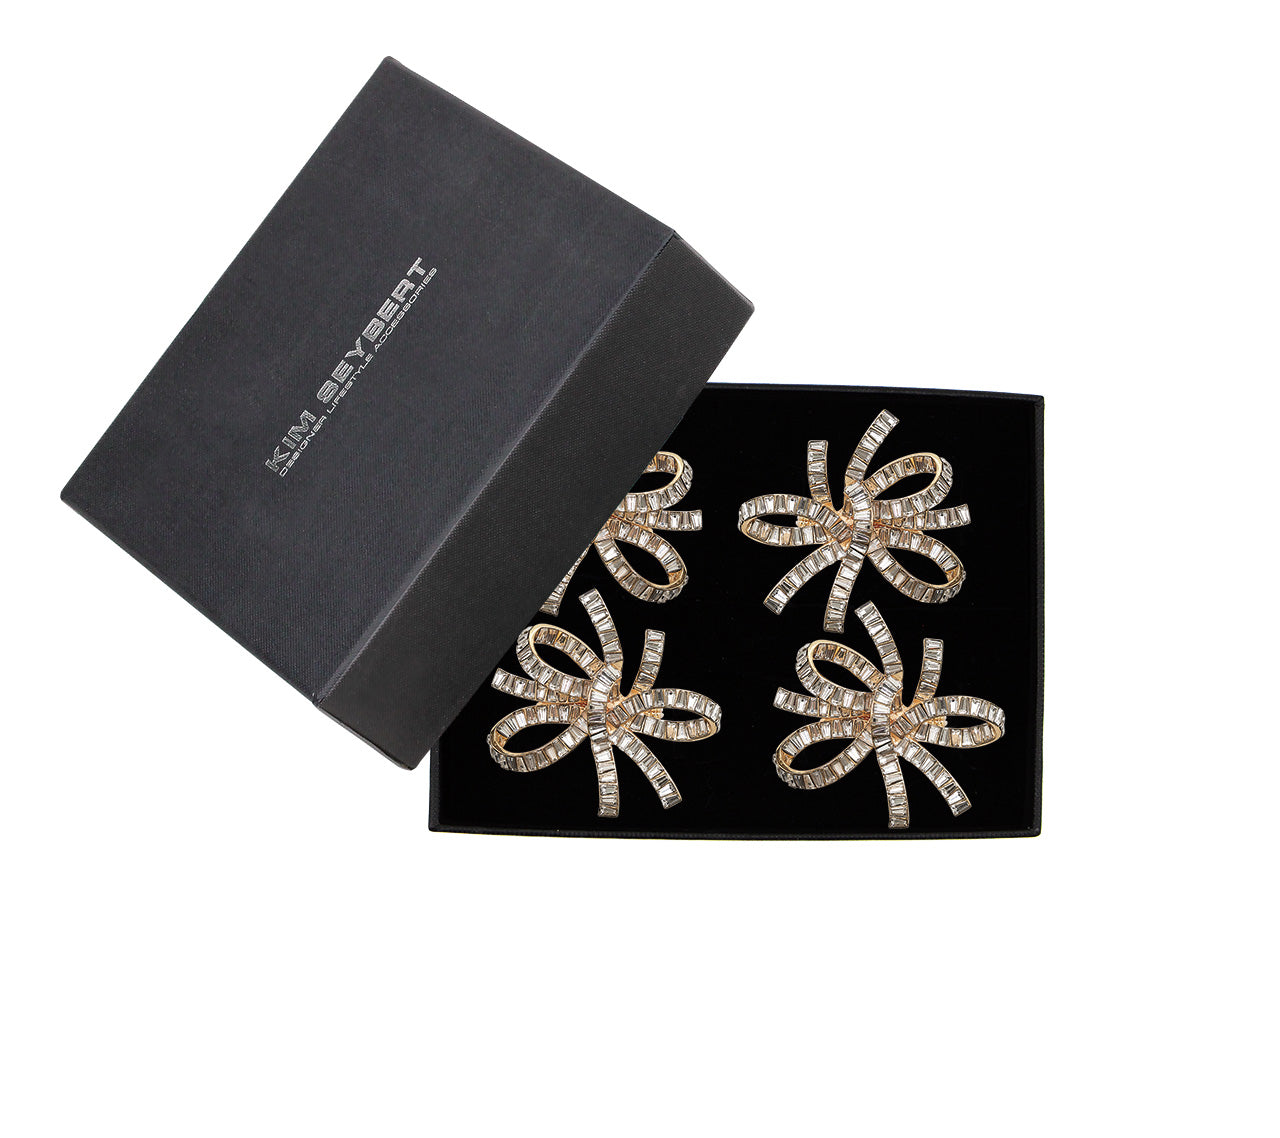 Kim Seybert Luxury Jeweled Bow Napkin Ring in Gold & Crystal in a Gift Box